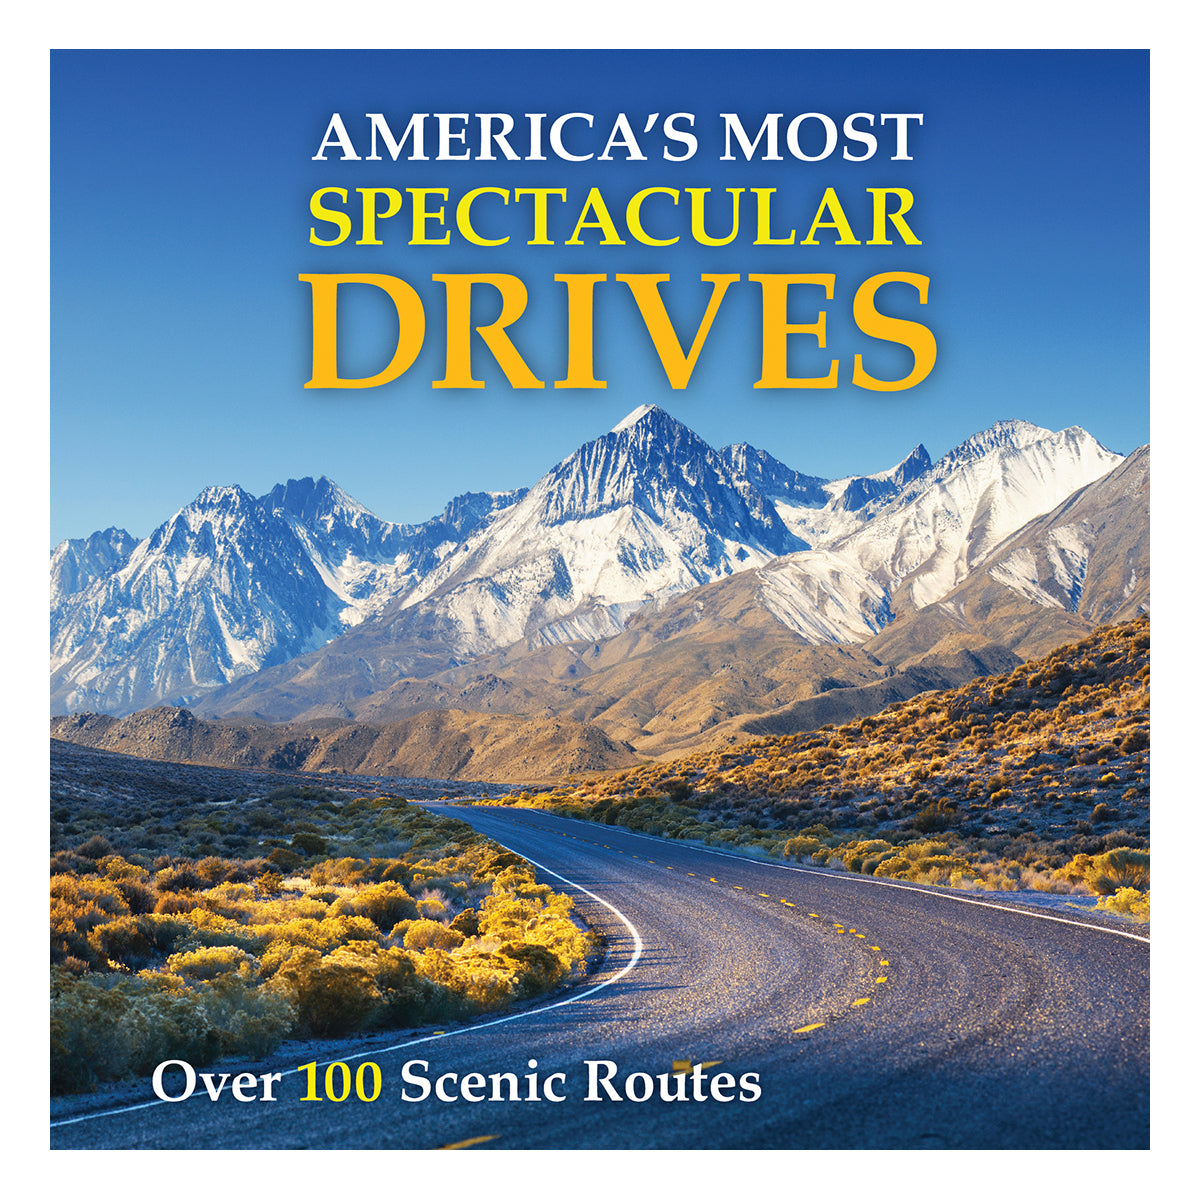 America's Most Spectacular Drives